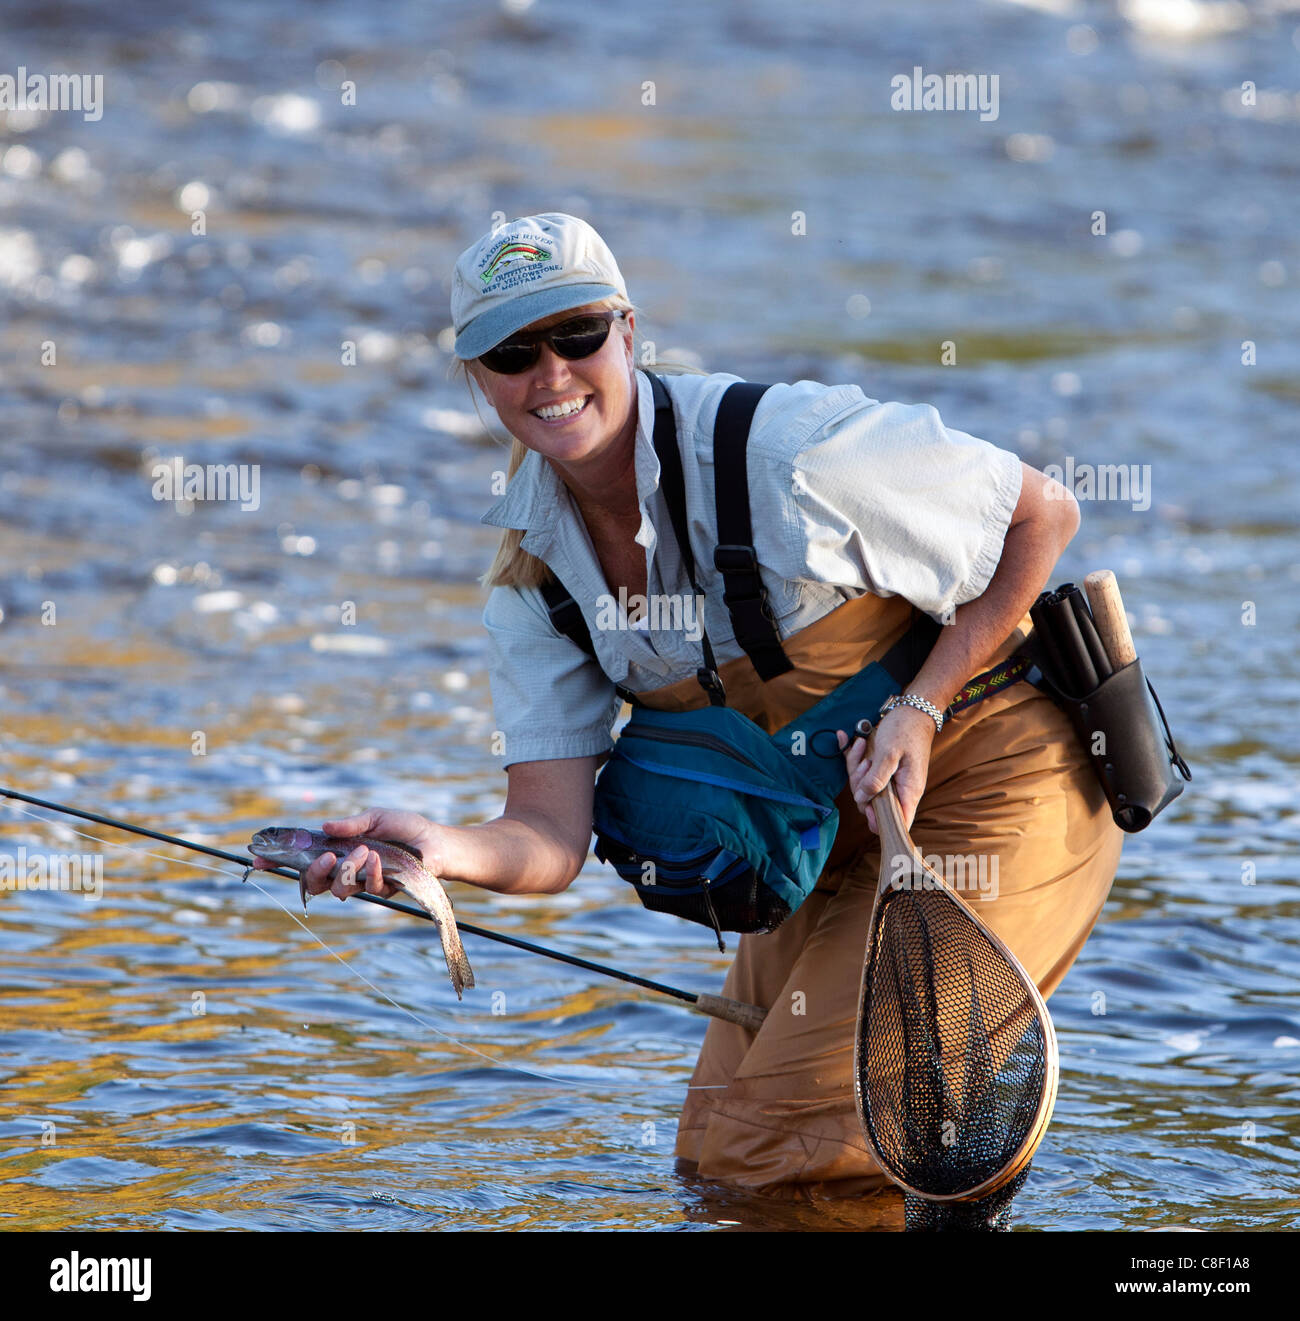 A woman female fly-fishing with a freshly caught rainbow trout in